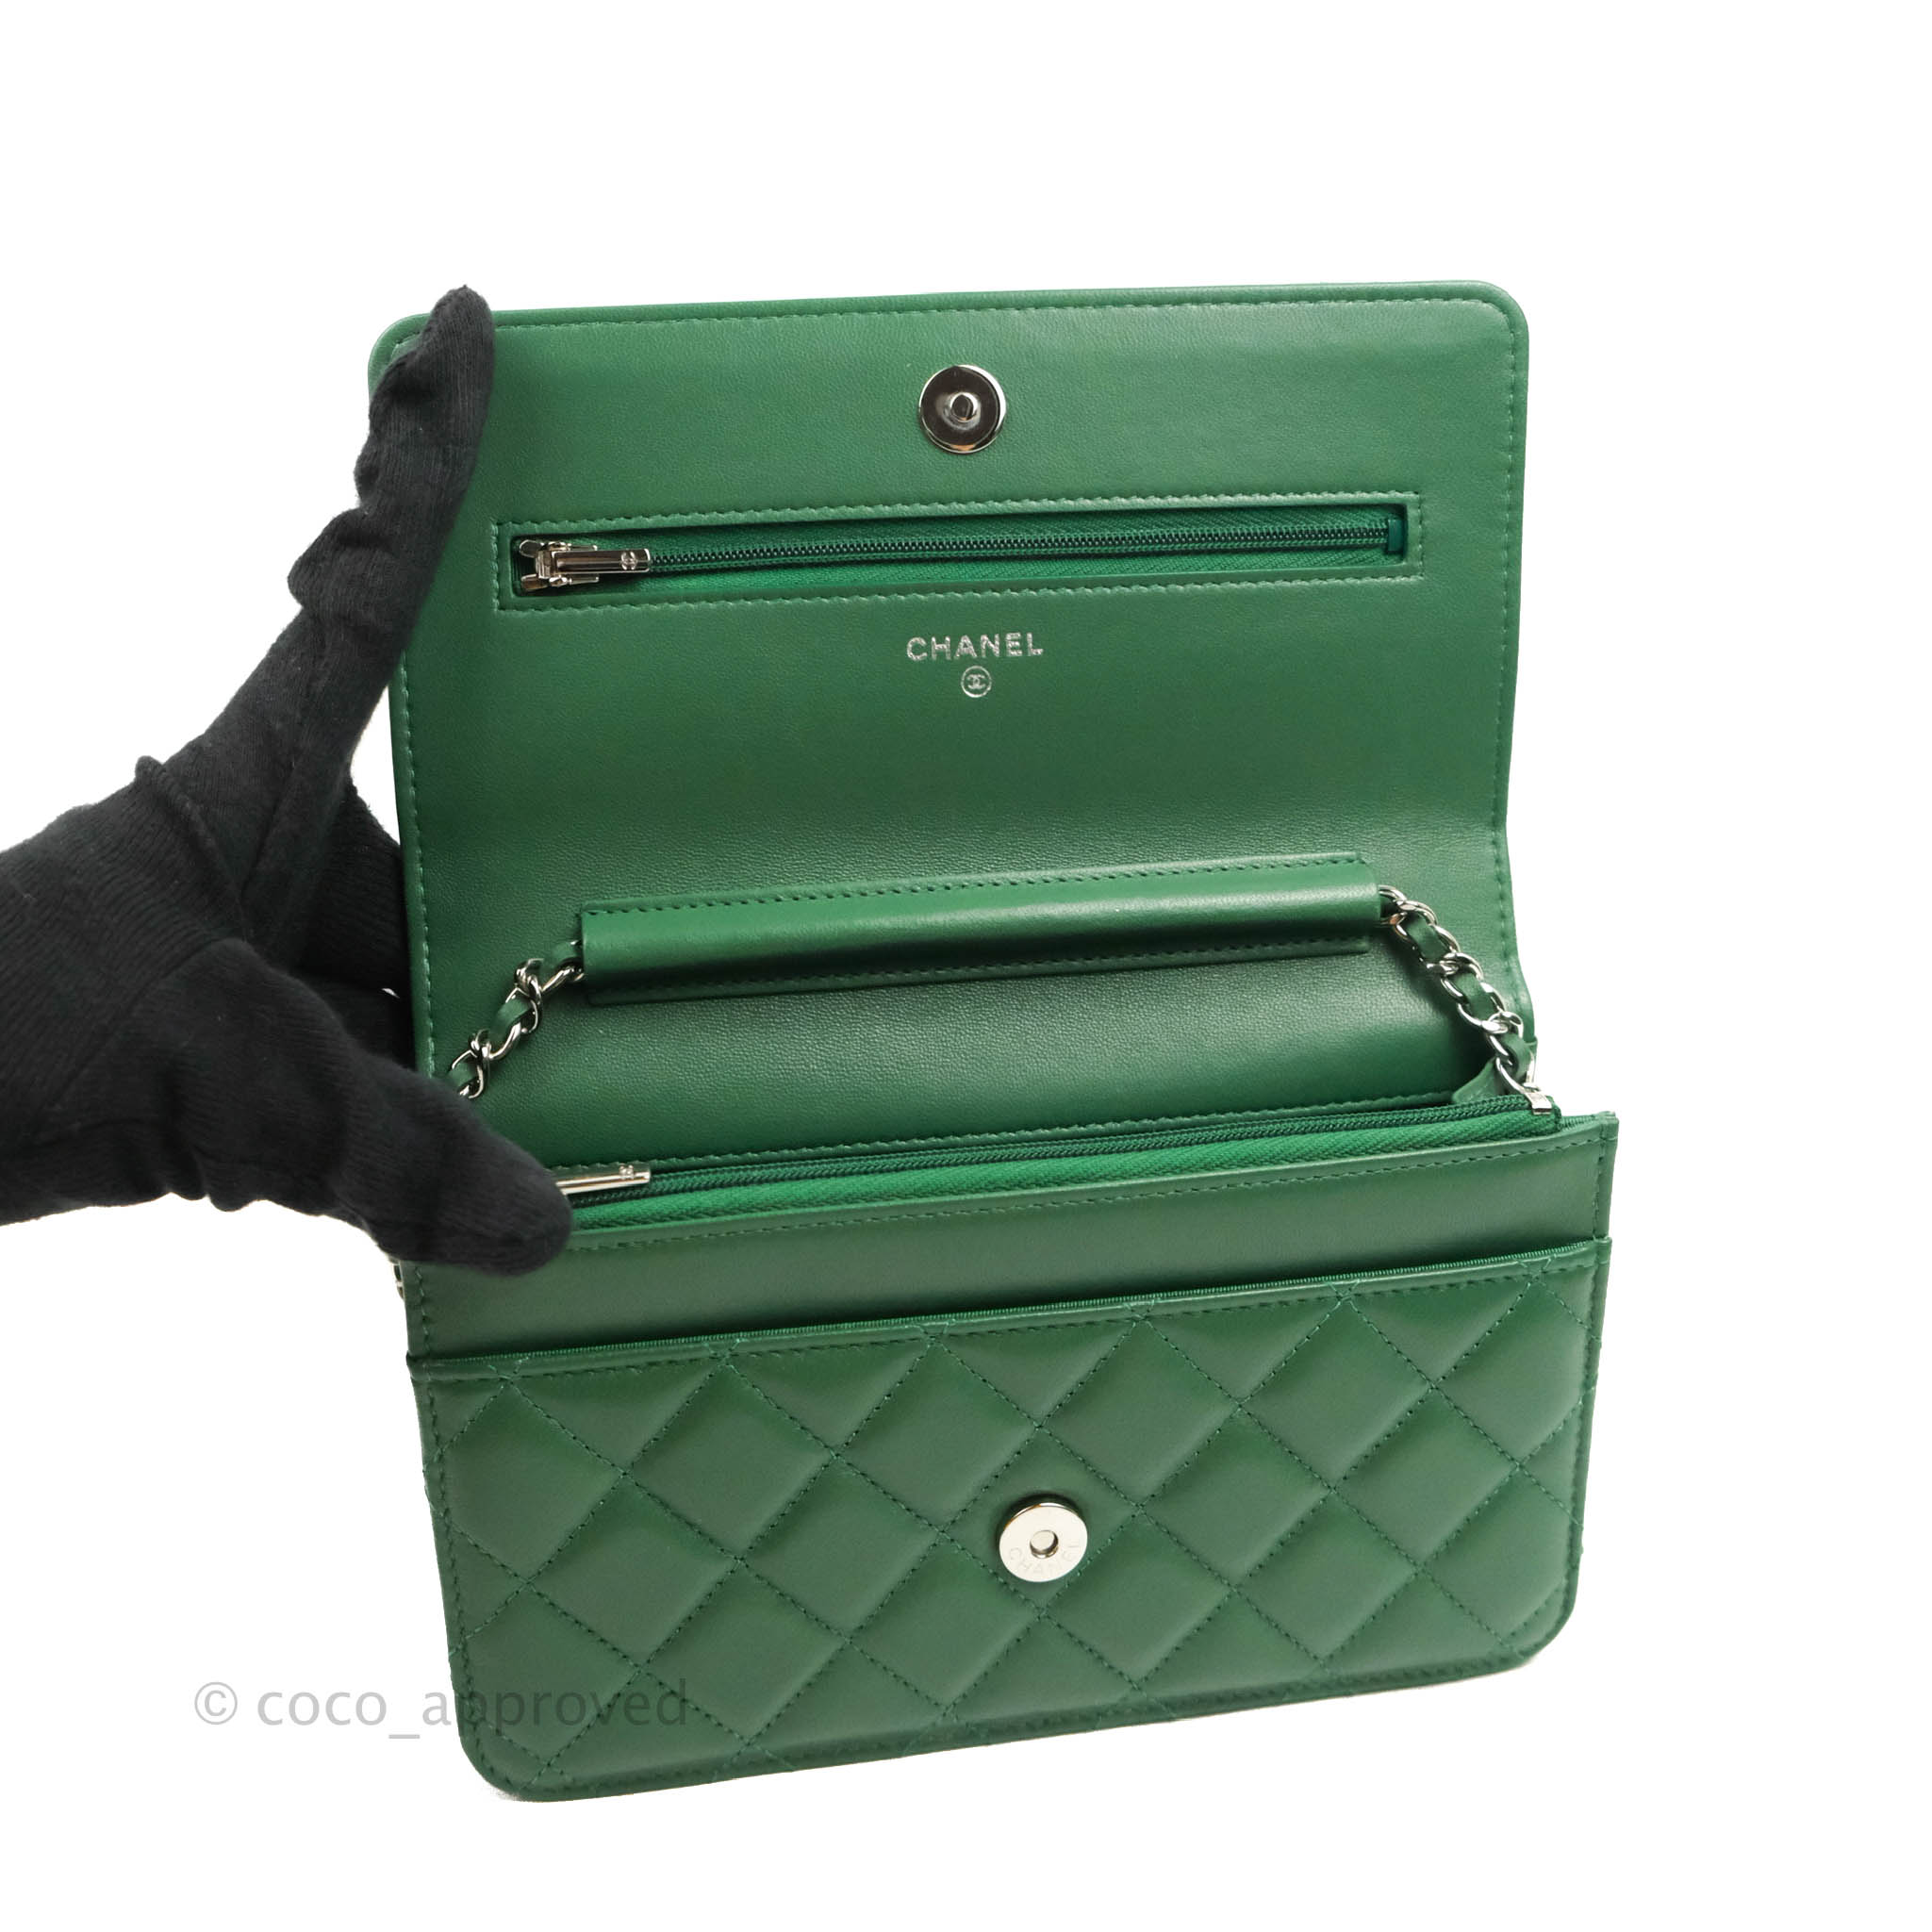 Chanel Classic Wallet on Chain Ap0250 Y04059 NL298, Green, One Size